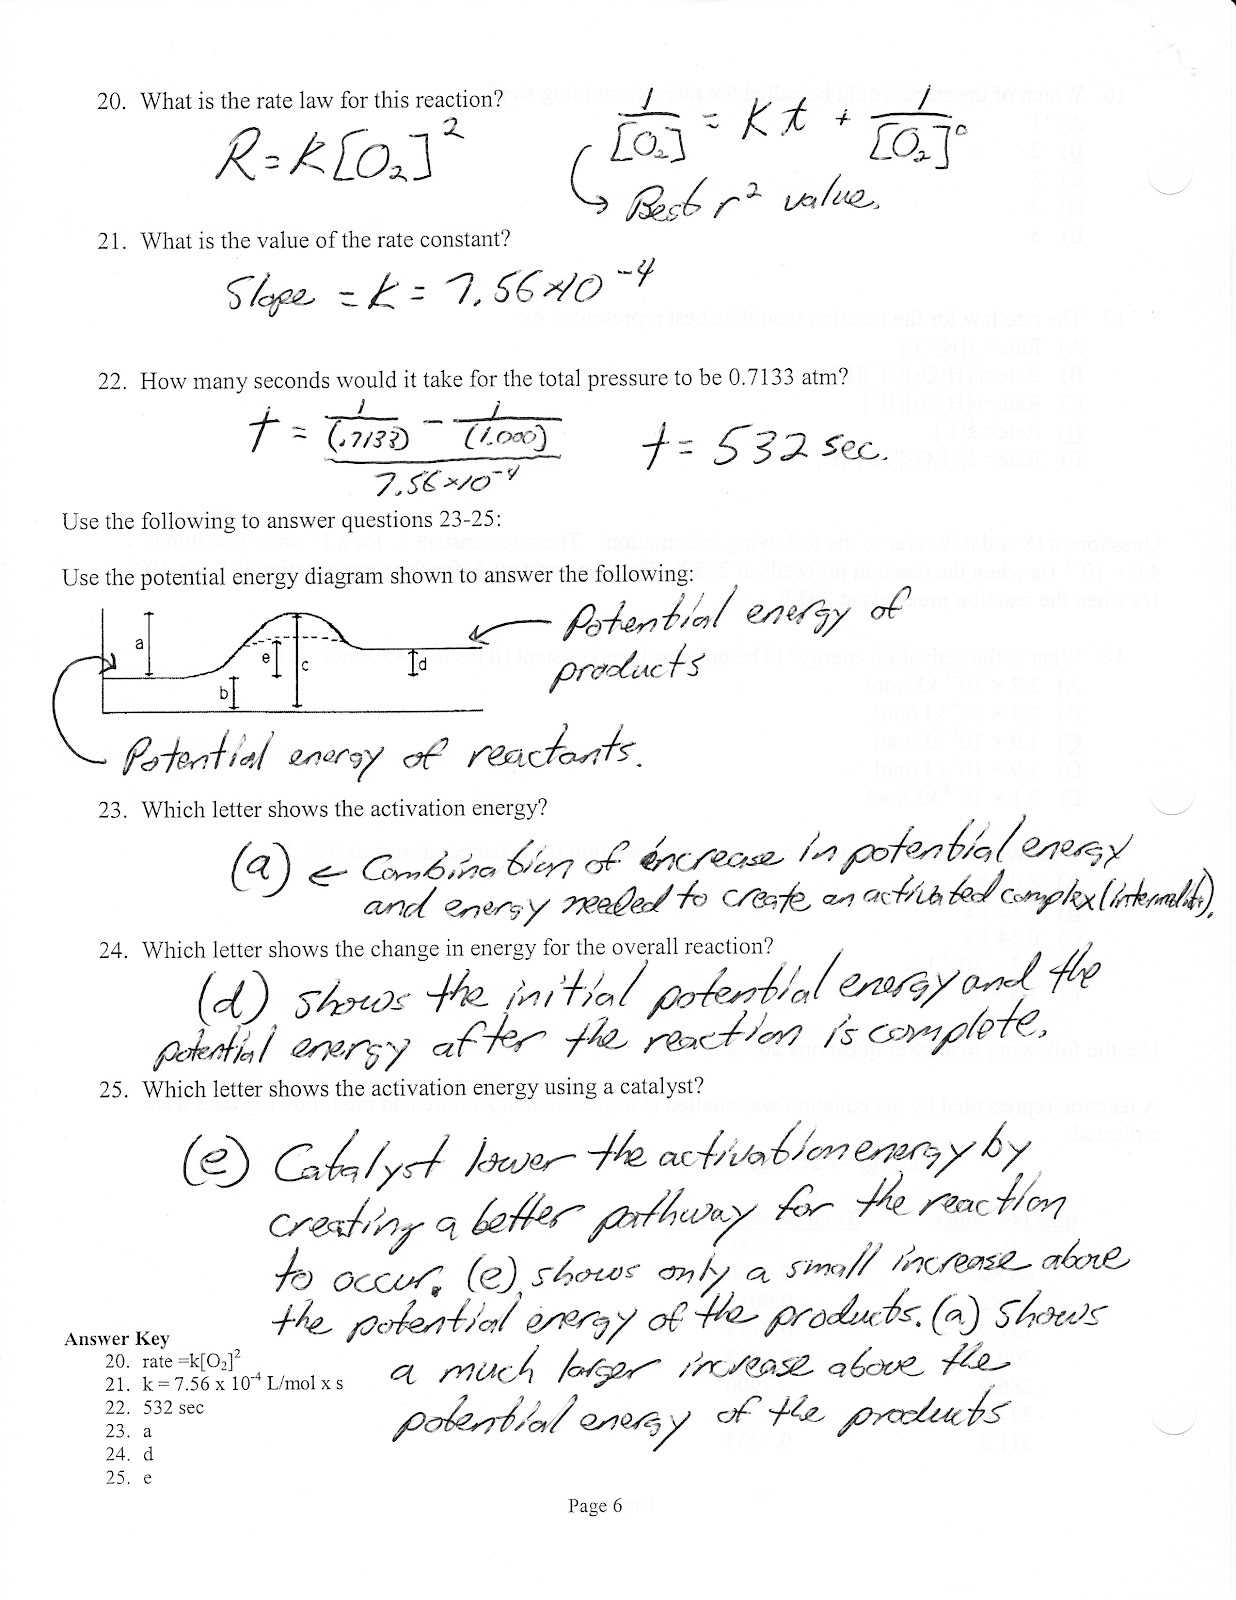 Worksheet Mole Mass Problems together with Heritage High School Mr Brueckner S Ap Chemistry Class 2011 12